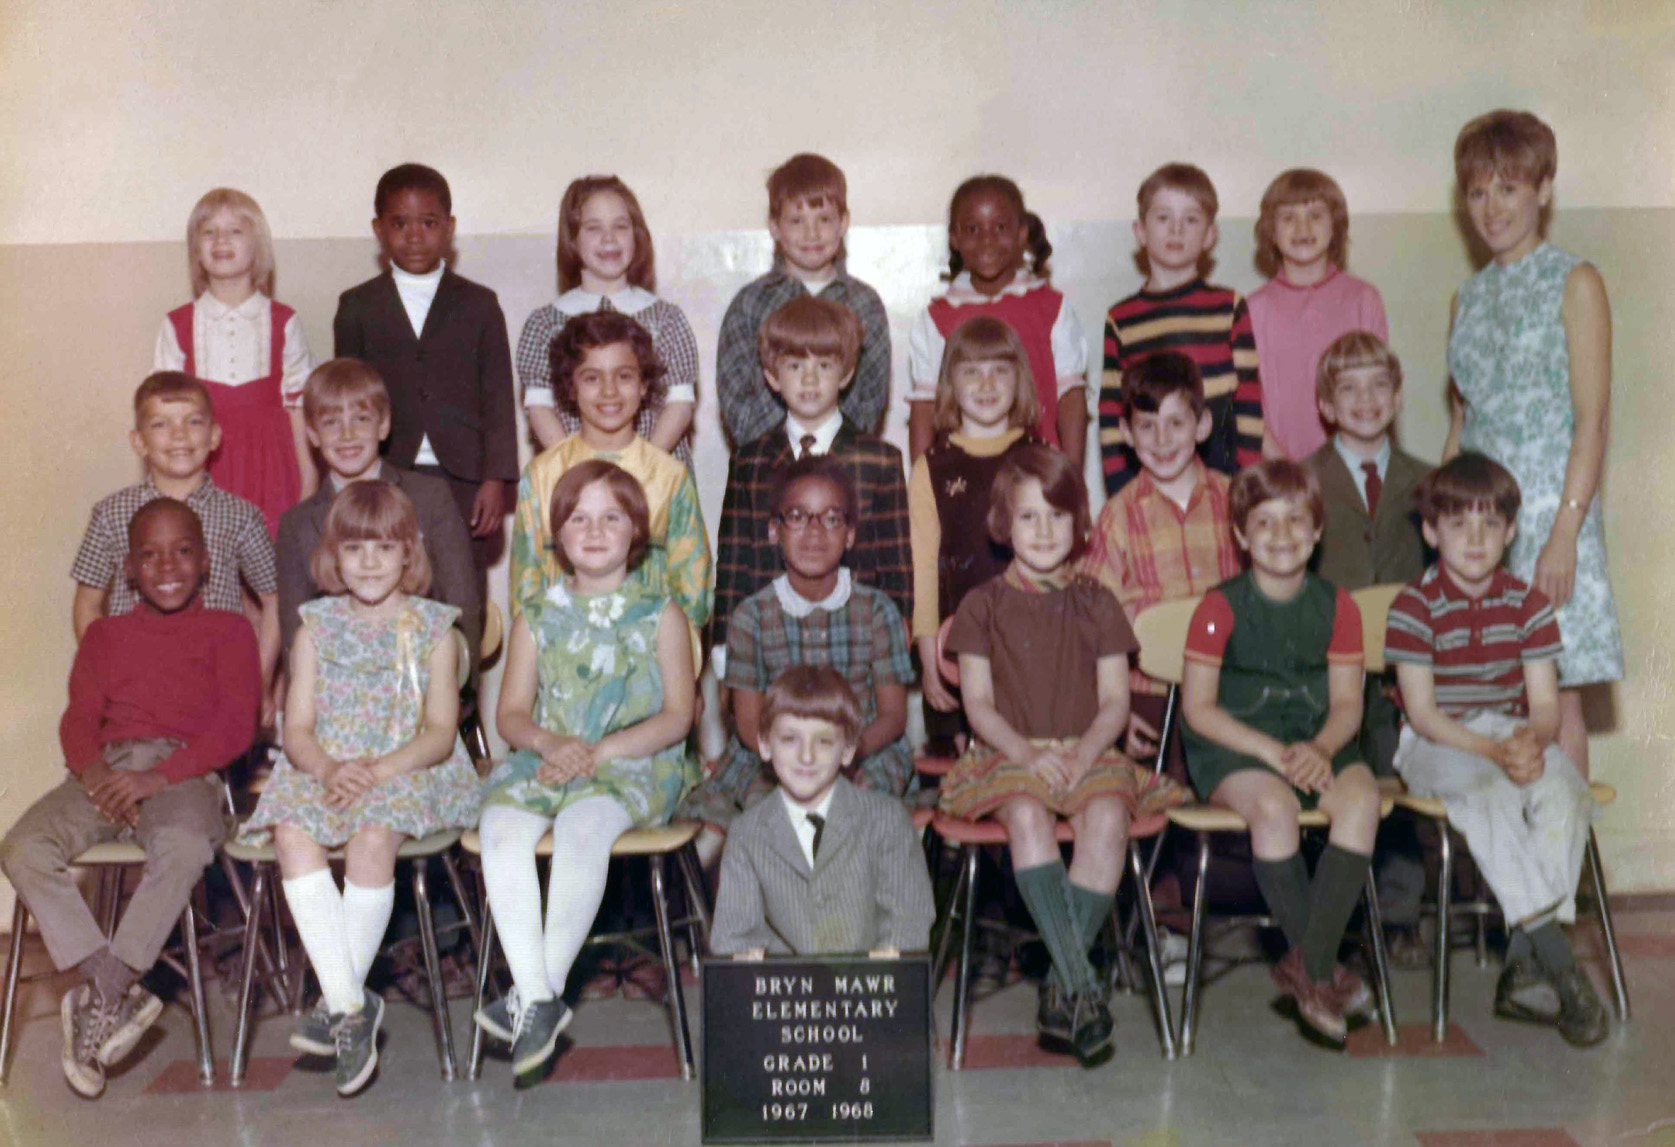 My brother Iden holds the sign for his first grade class picture taken in 1968. View full size.